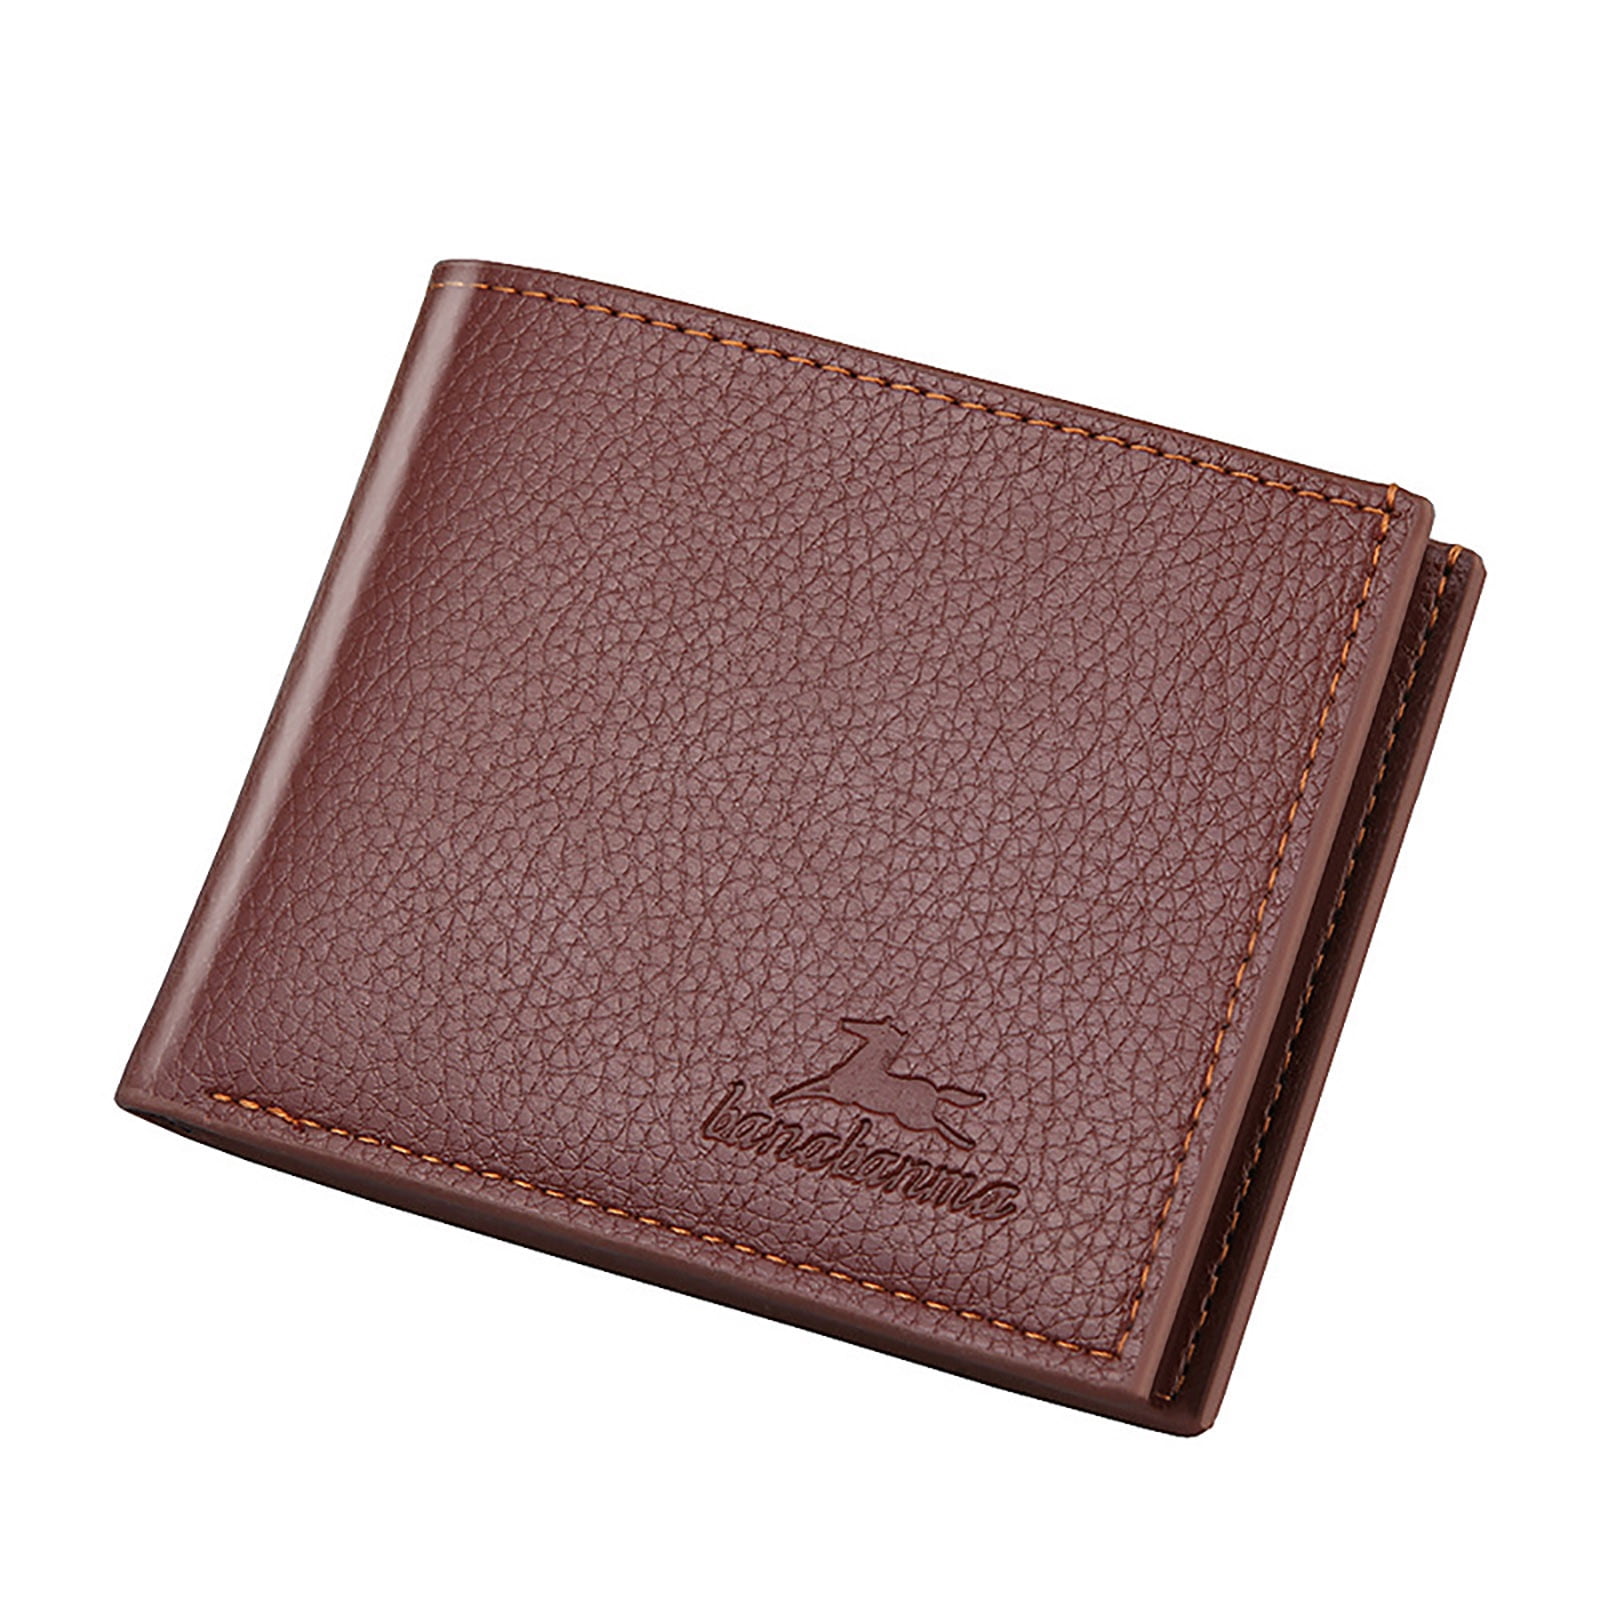 Buy Small Leather Coin Purse Online India at Nutcaseshop.com